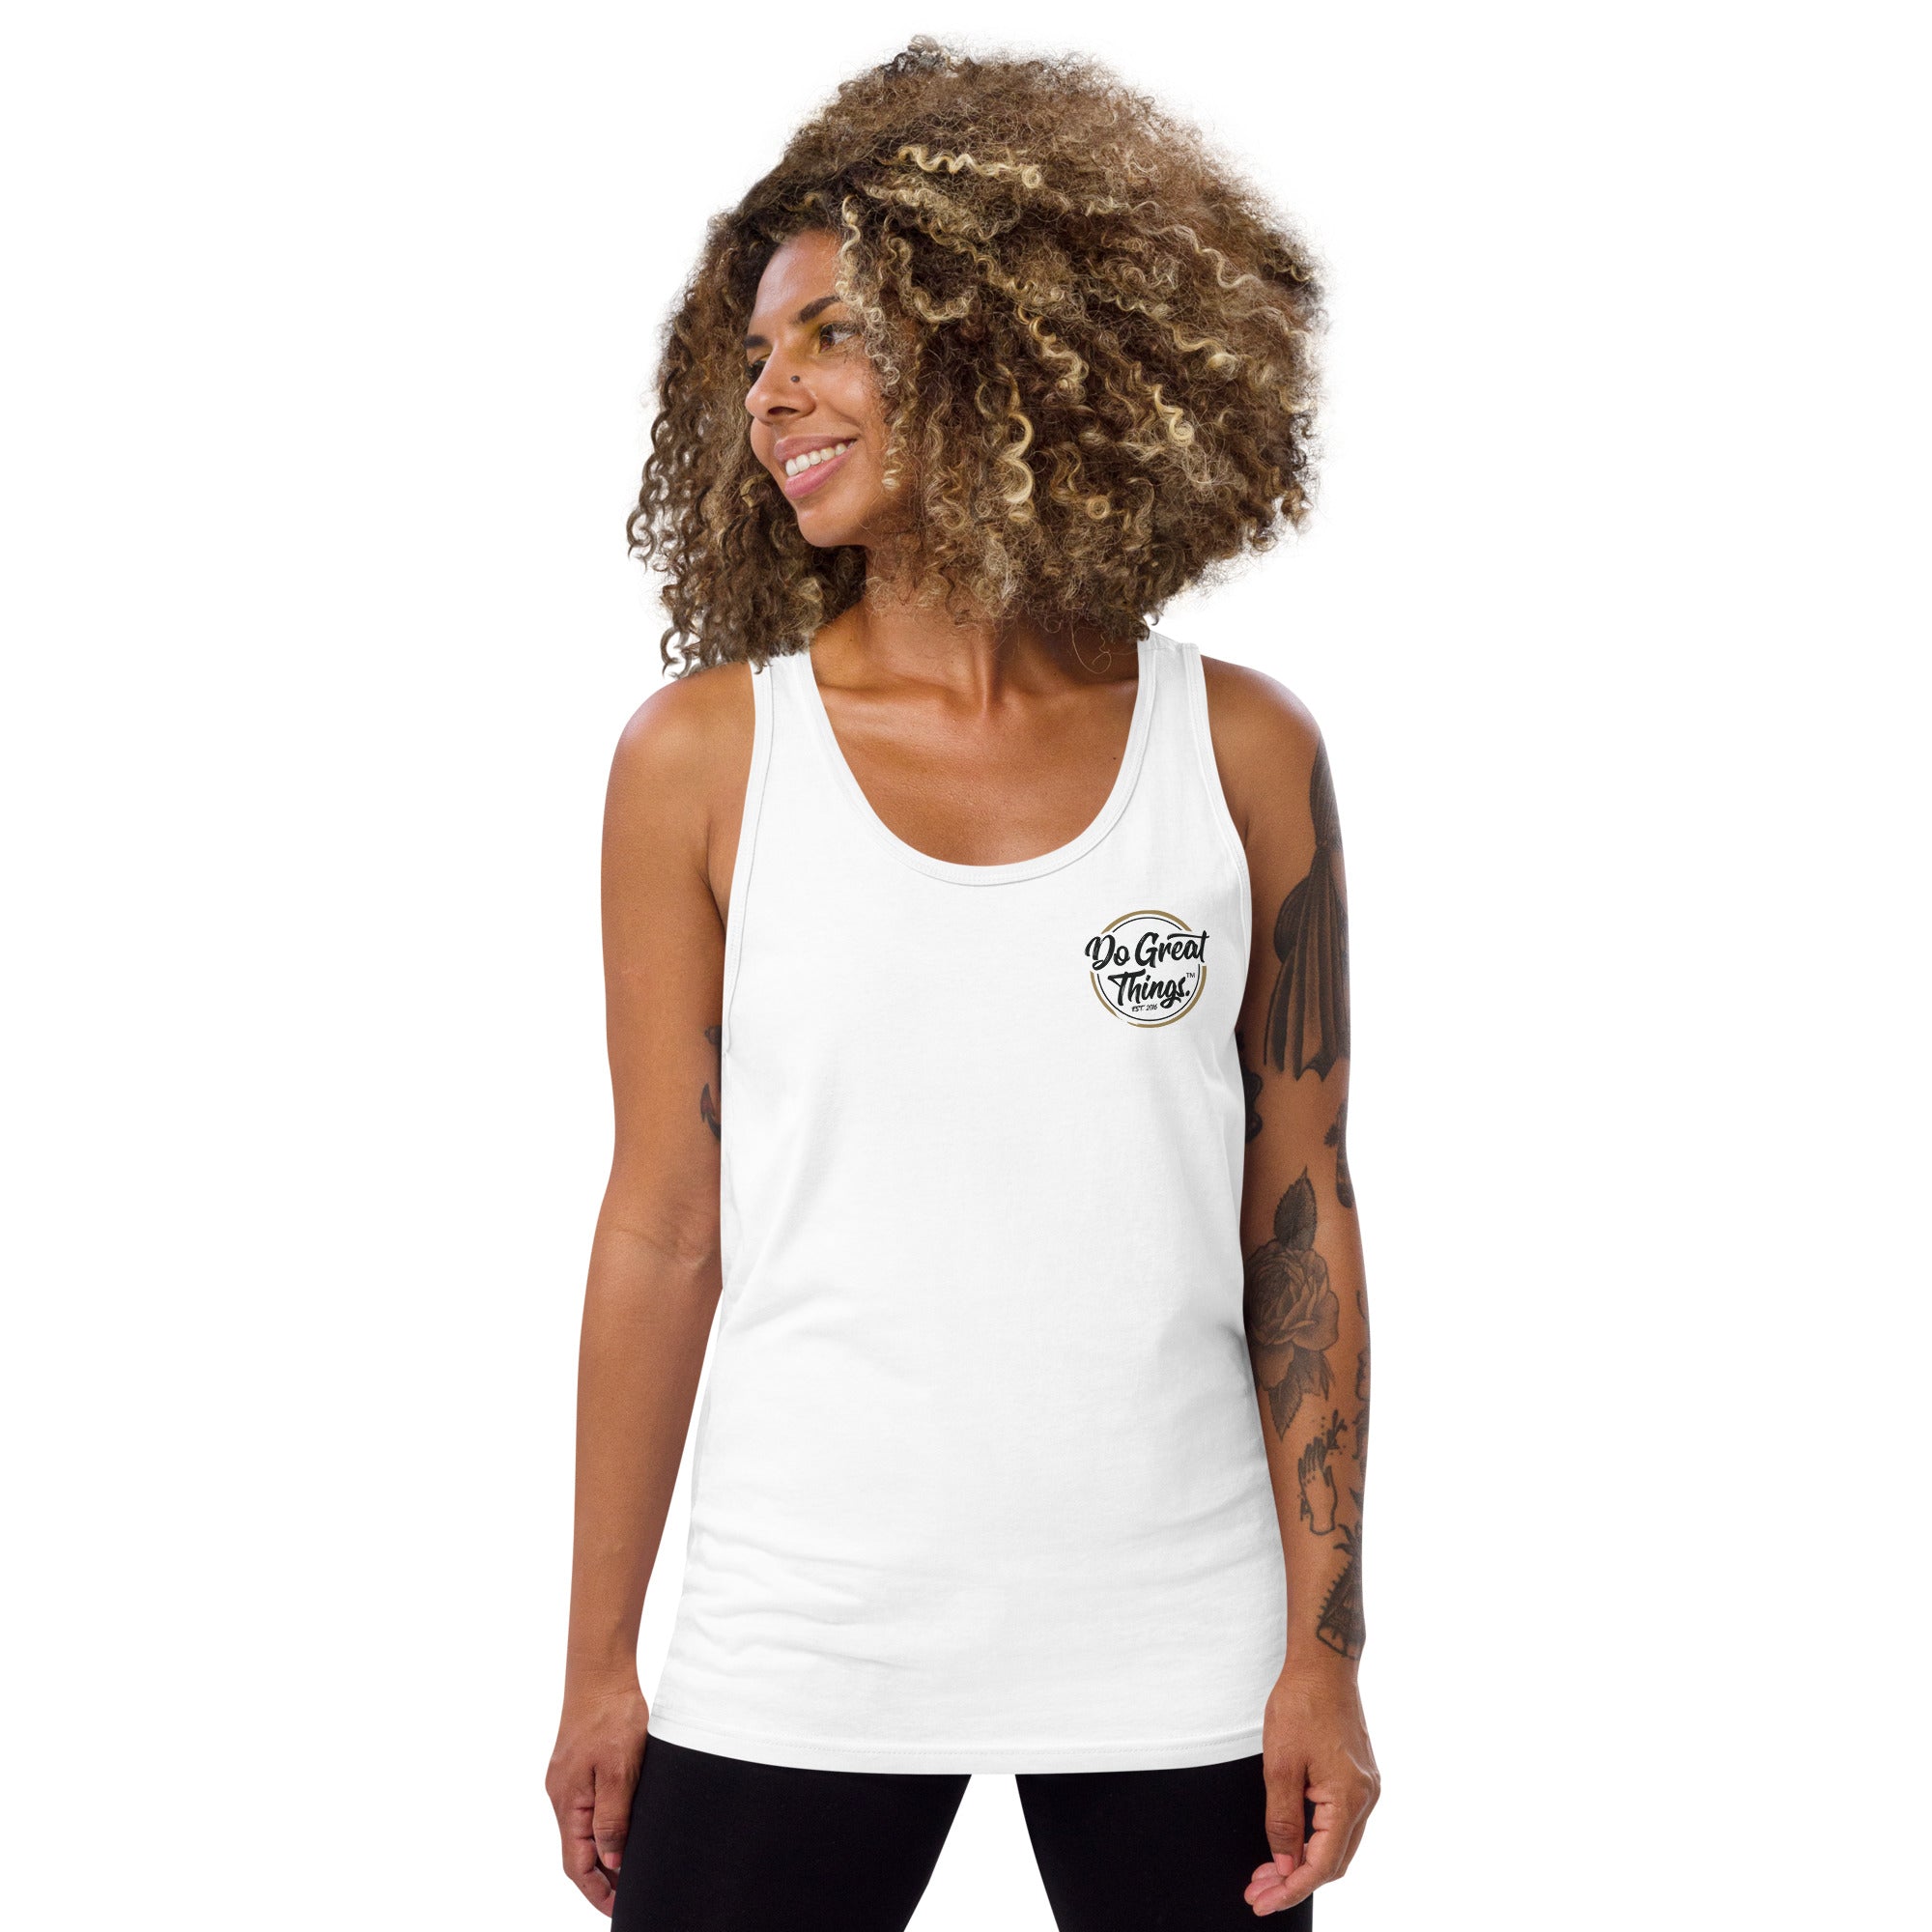 Do Great Things® Unisex Tank Top